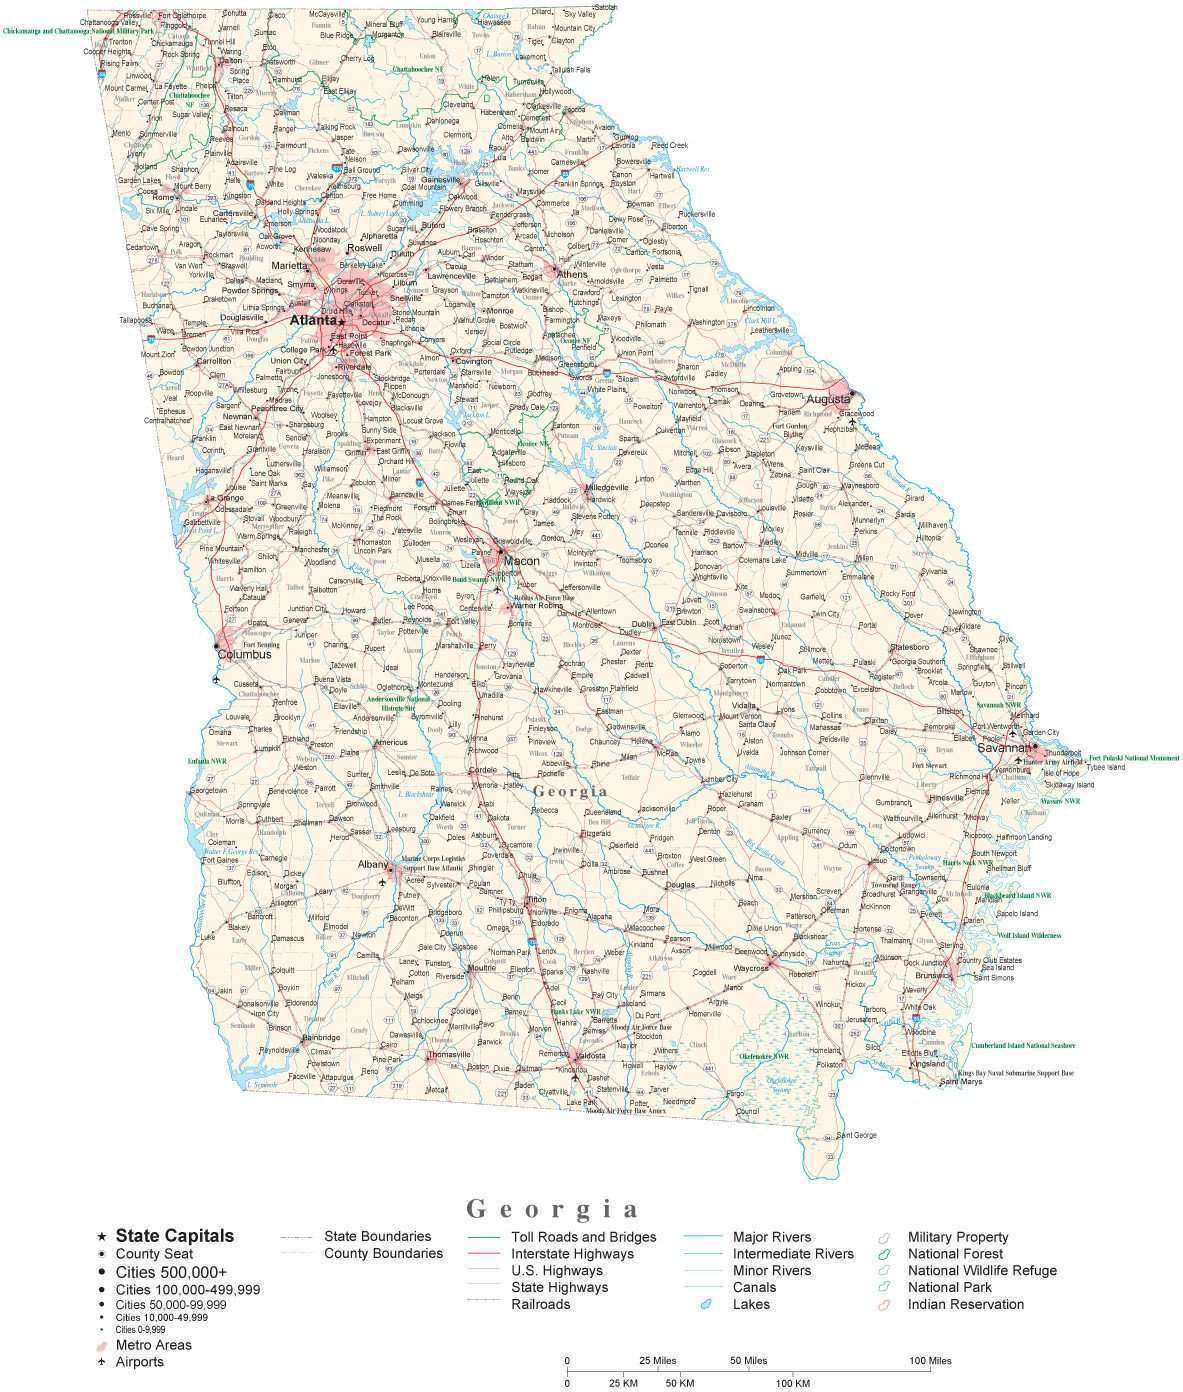 Georgia Detailed Cut-Out Style State Map in Adobe Illustrator Vector ...